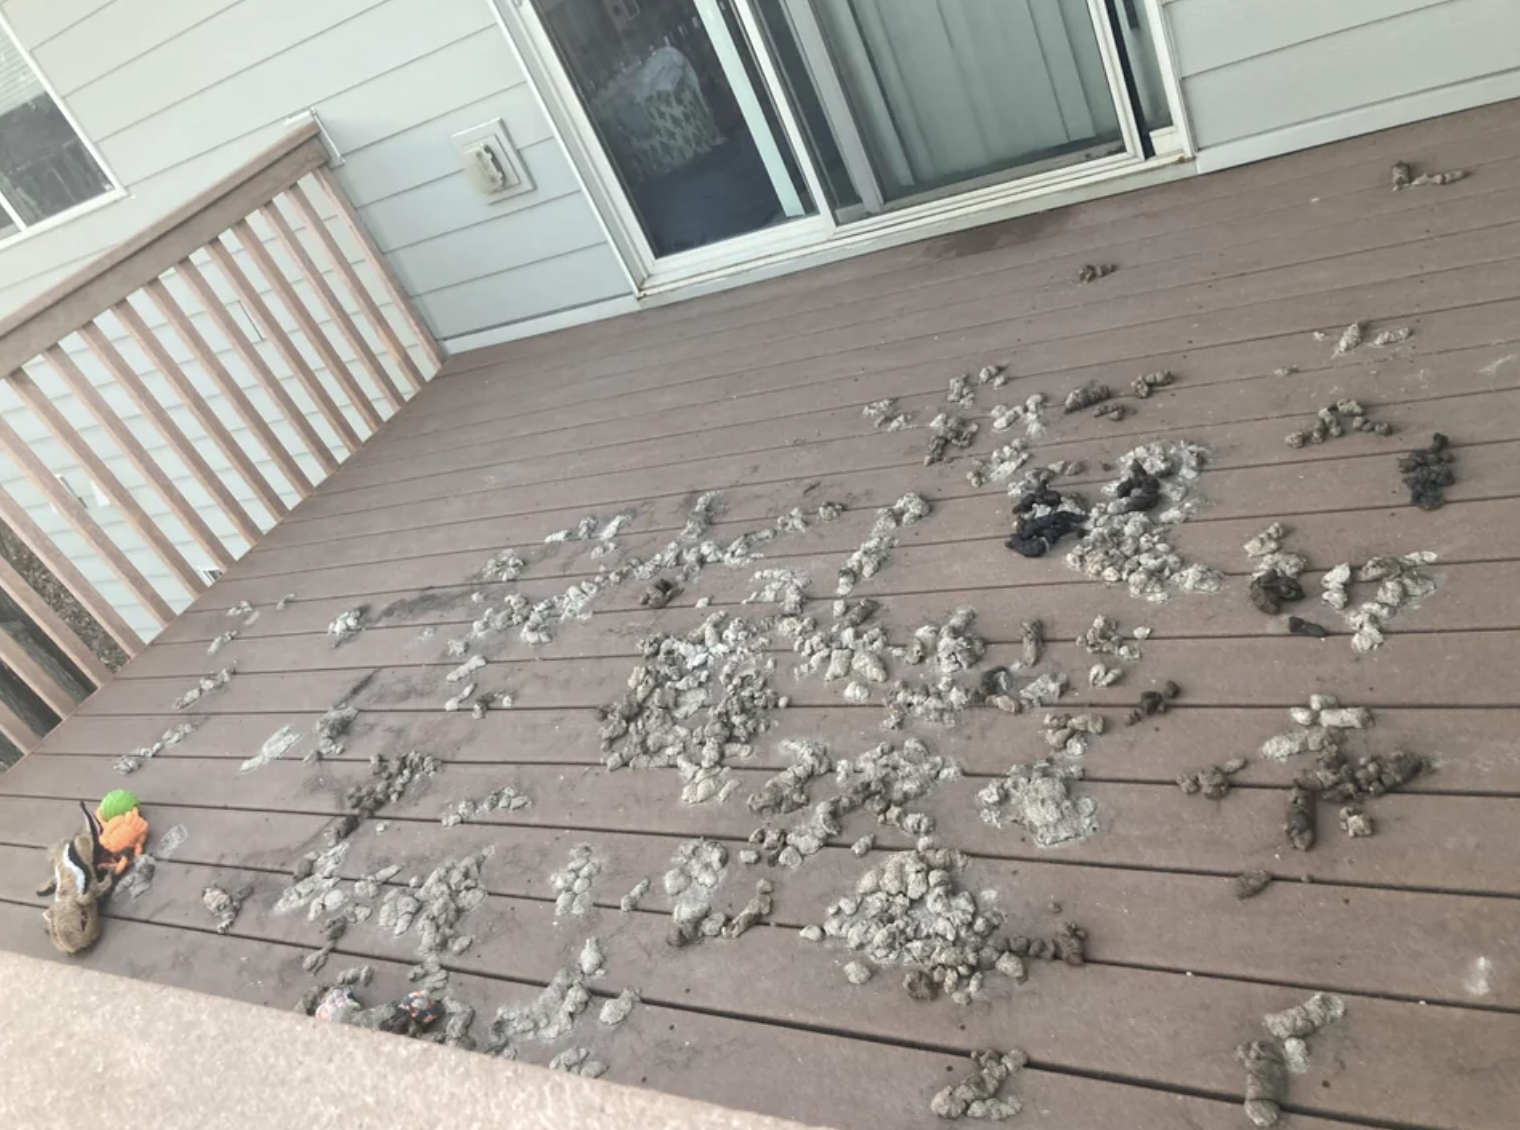 dried and old dog poop covering the deck